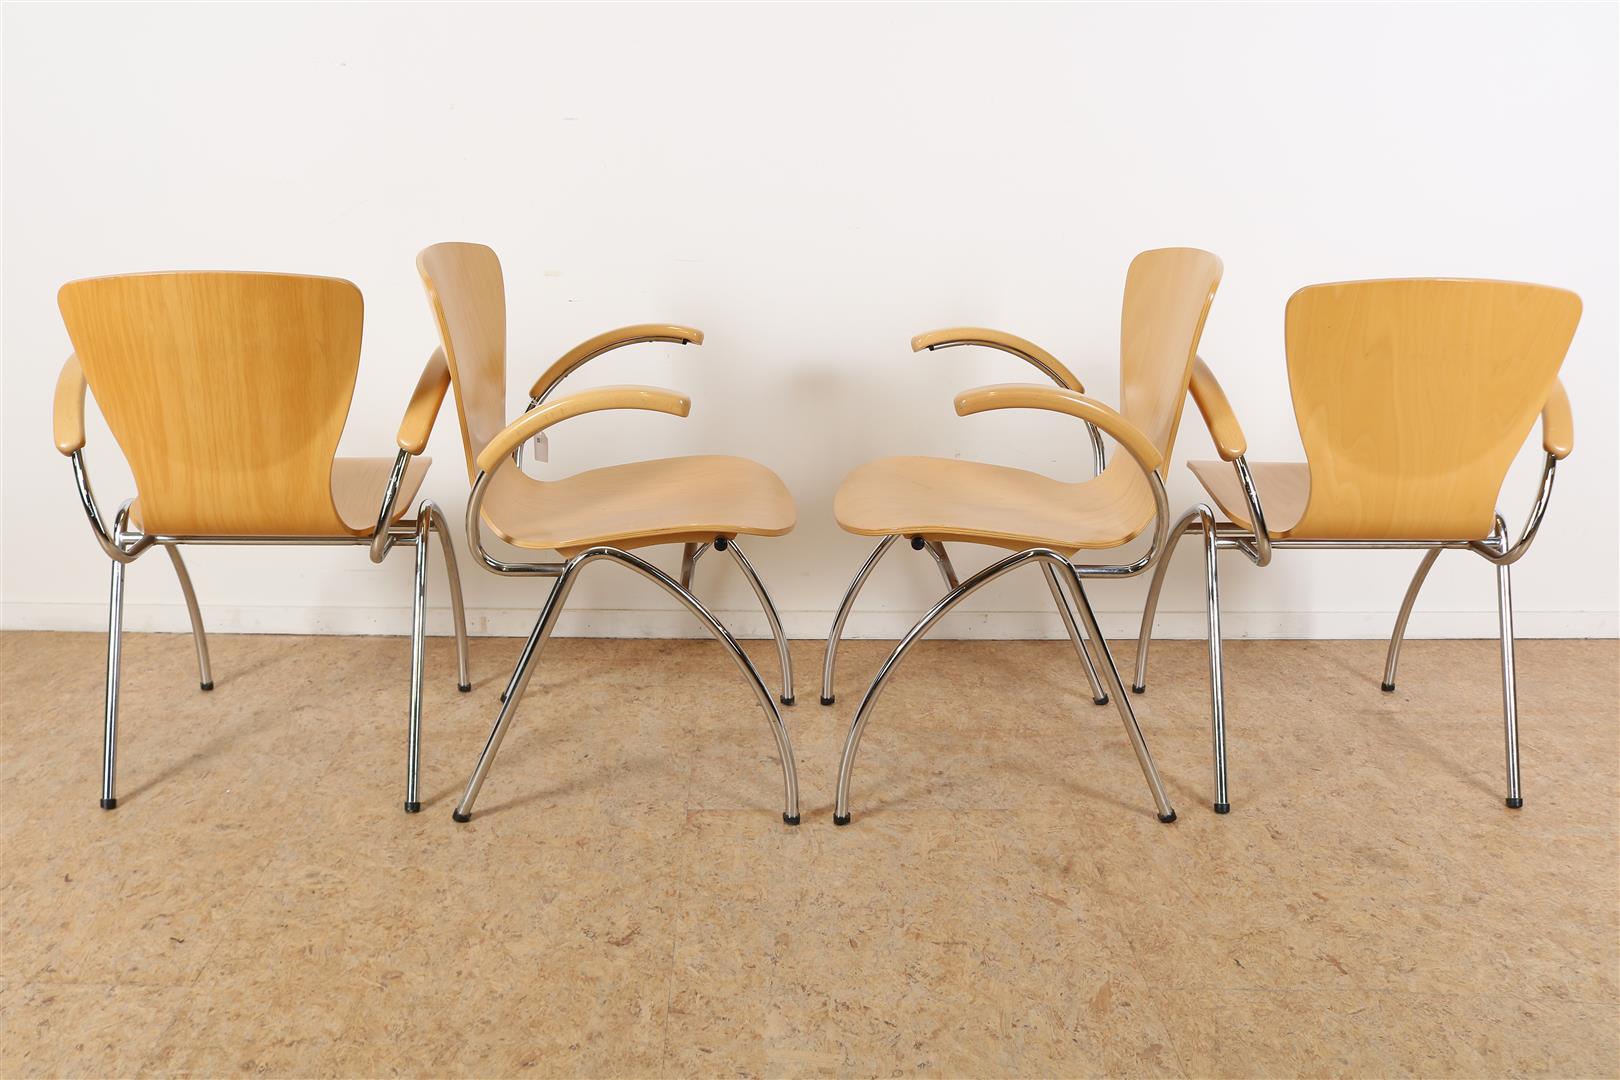 Series of 4 beech wood armchairs on chrome base, dated 2001. (damage on seats) - Image 2 of 8